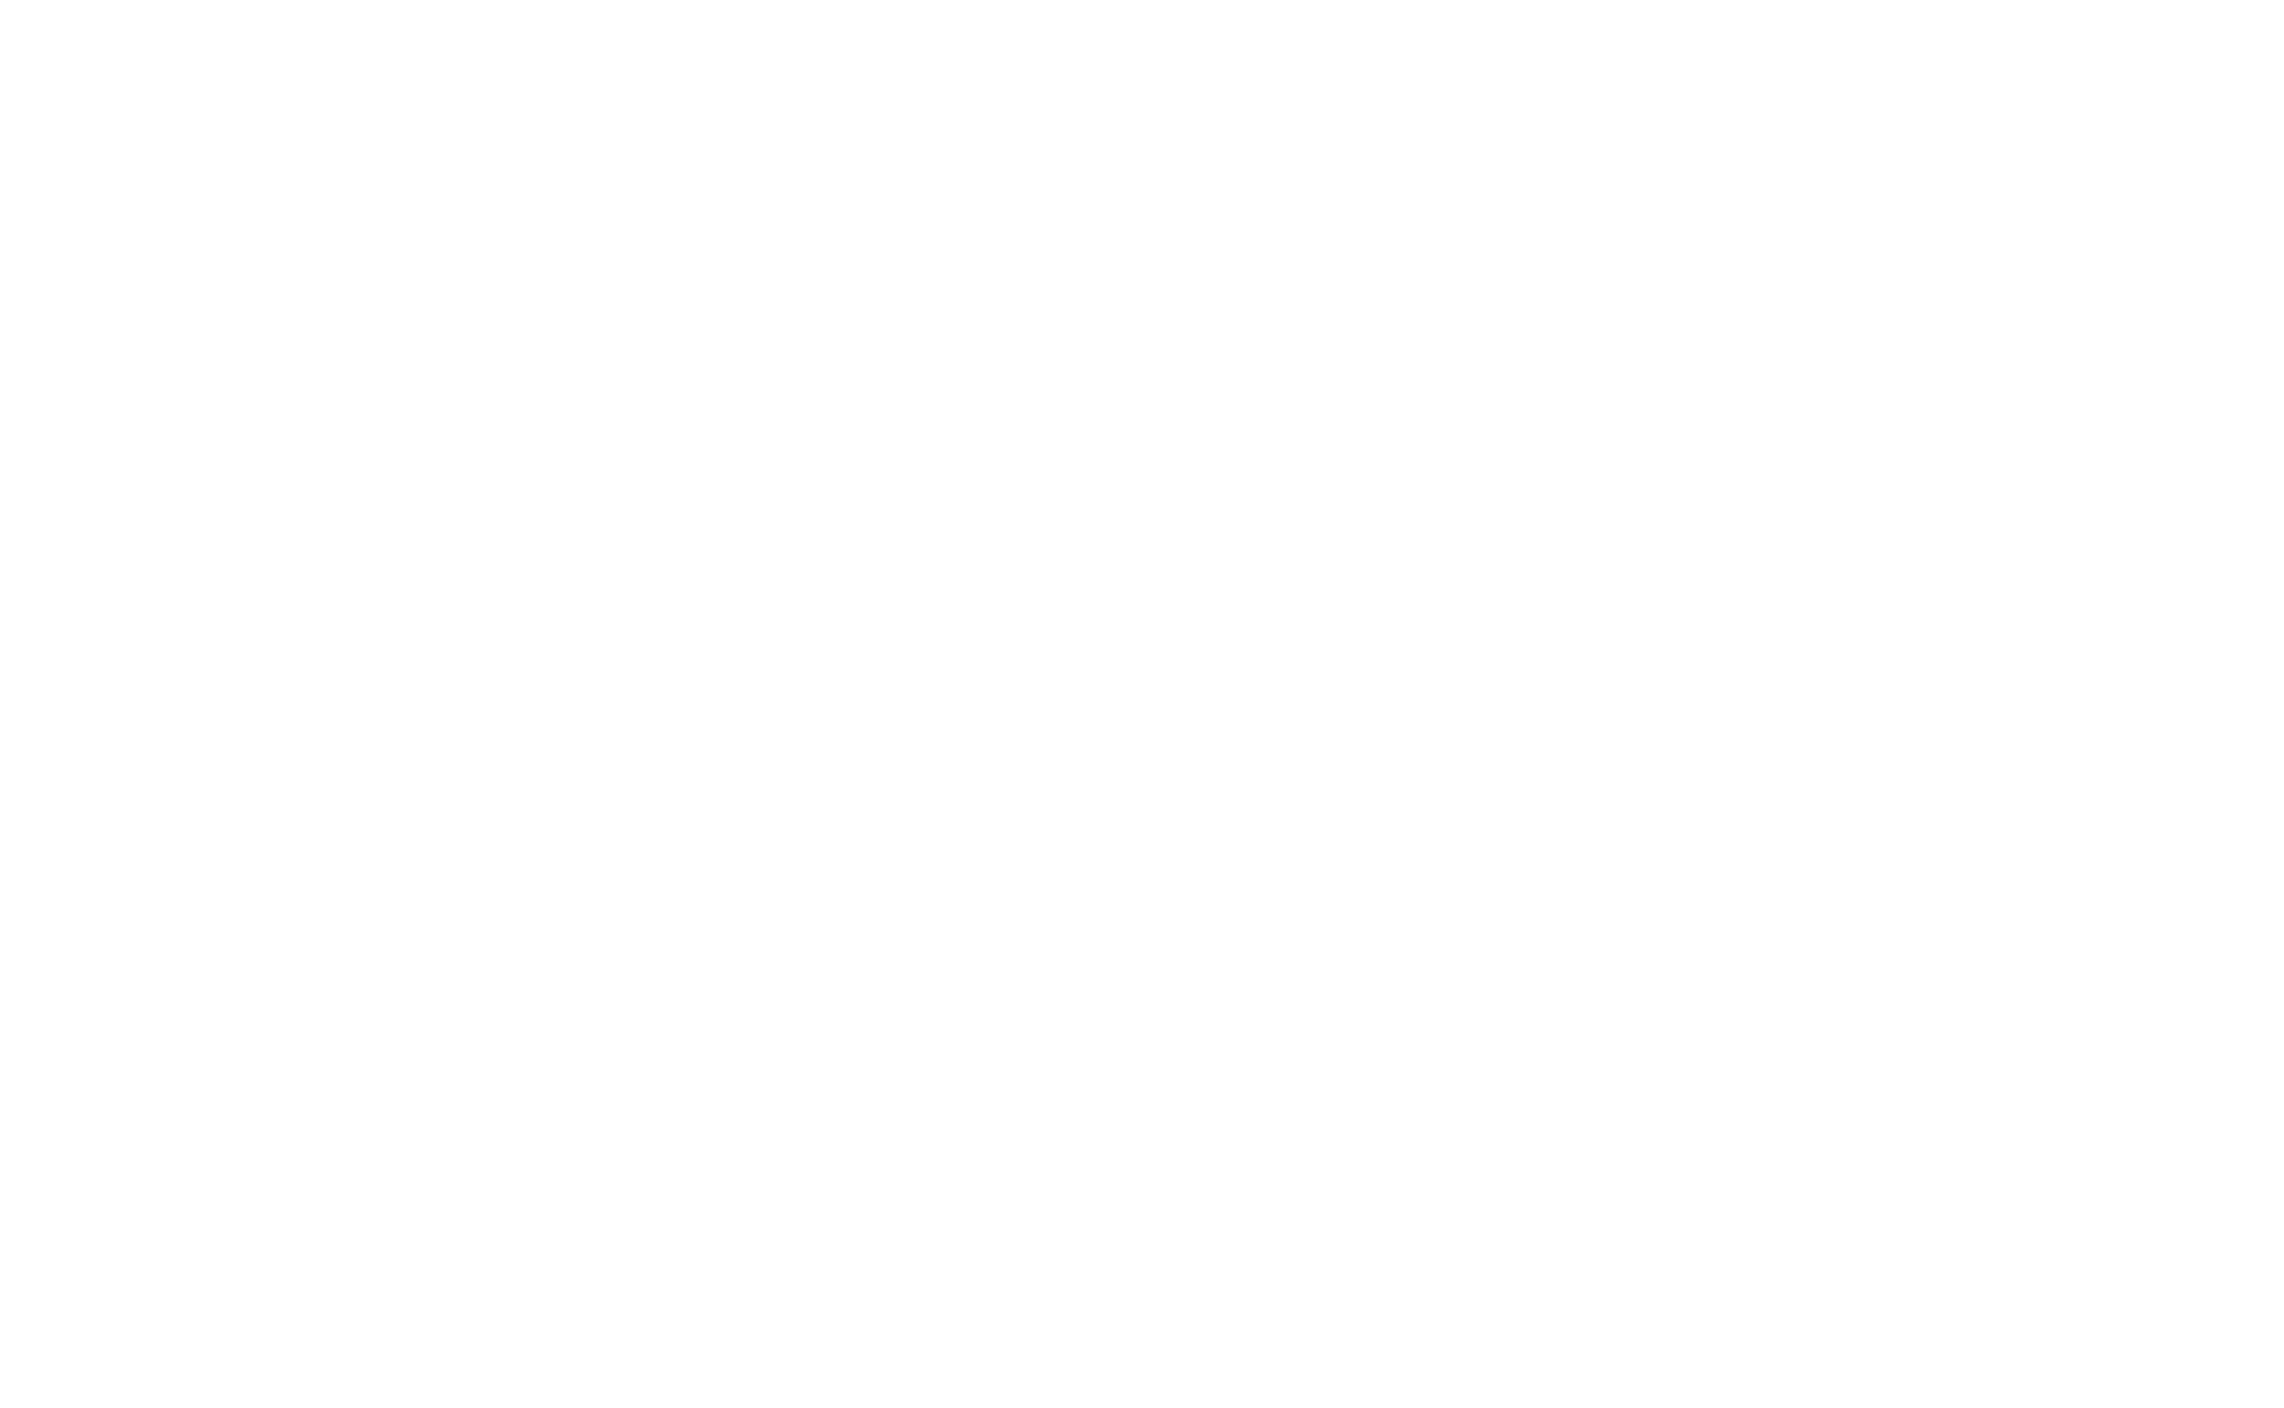 ActionCOACH_LOGO2019_STACKED_W-1